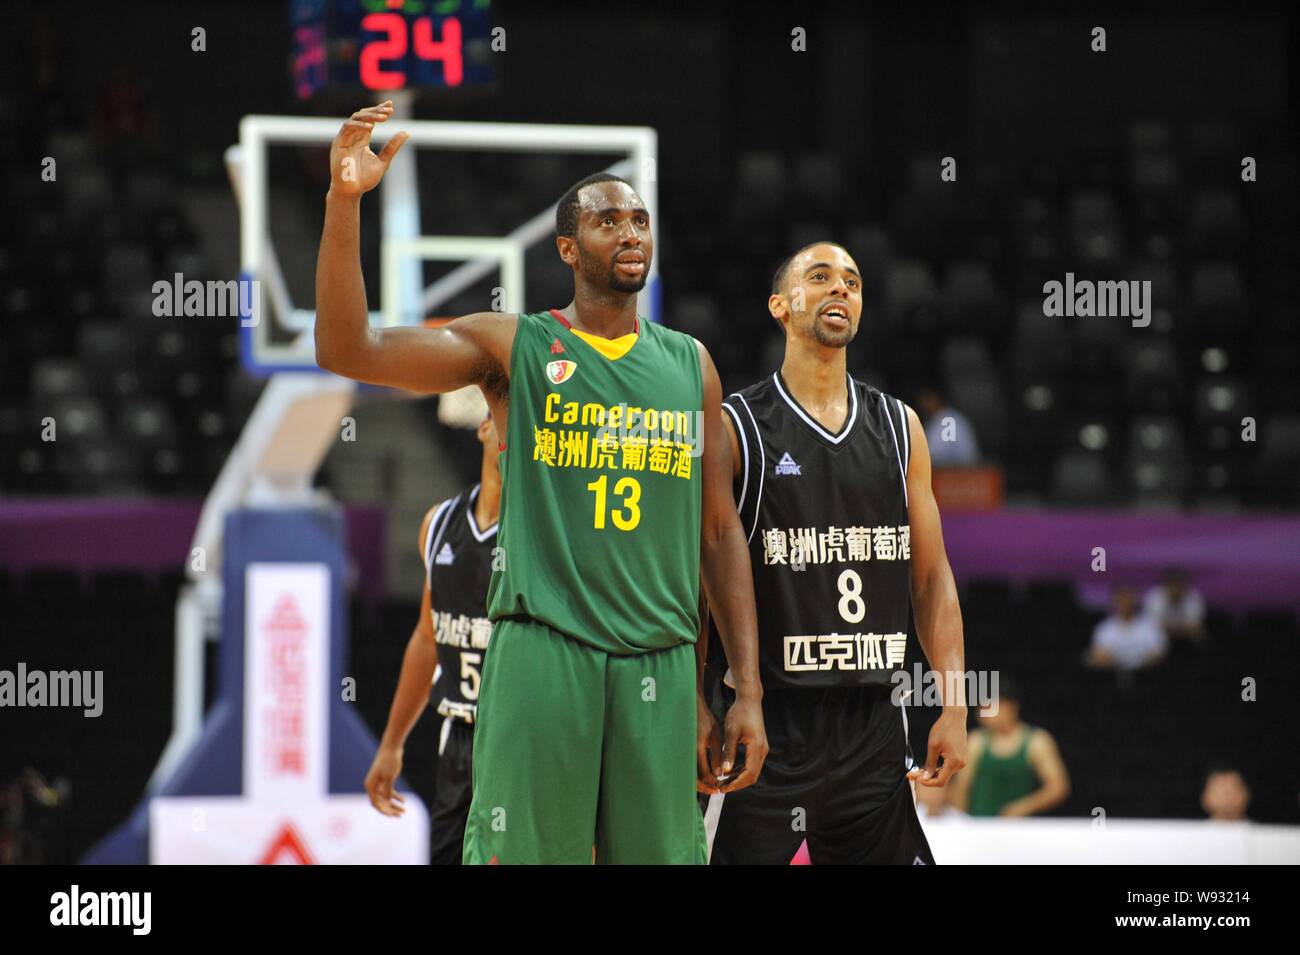 A player of Cameroon National Basketball Team, left, waves after the 2013  Four Nations Mens Basketball Elite Tournament in Shenzhen, southeast Chinas  Stock Photo - Alamy